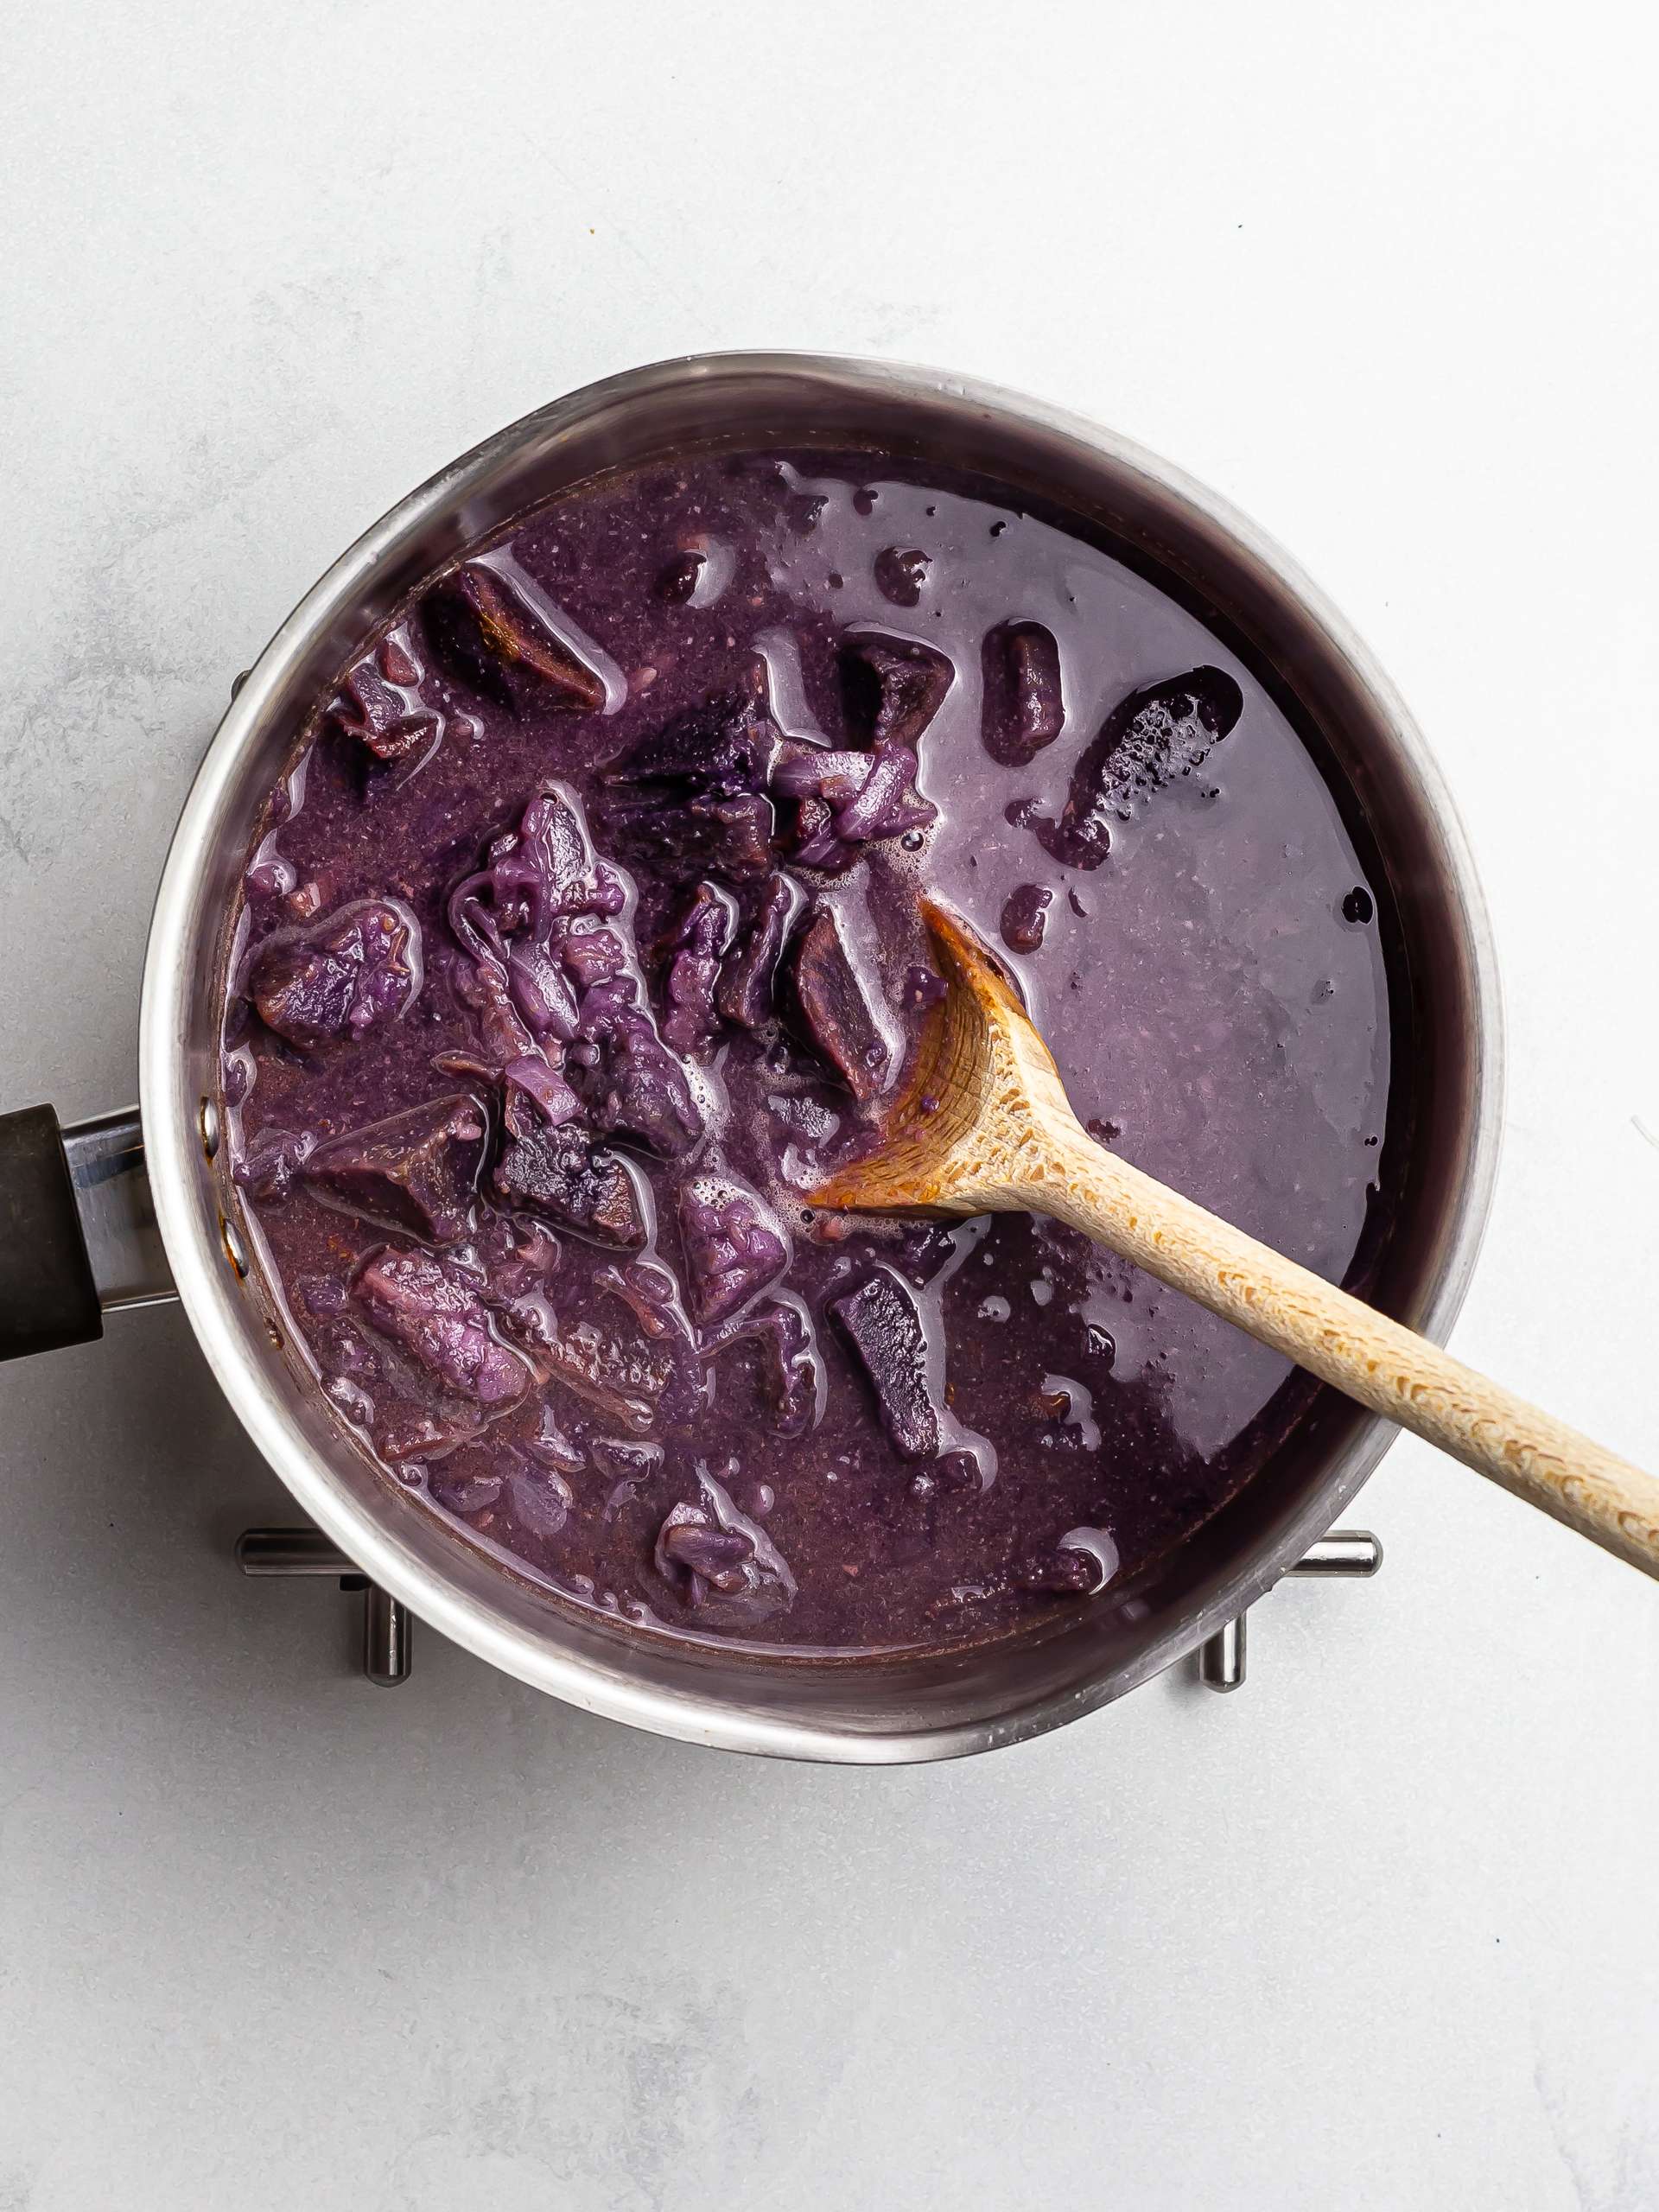 stewed purple yam with coconut milk and broth